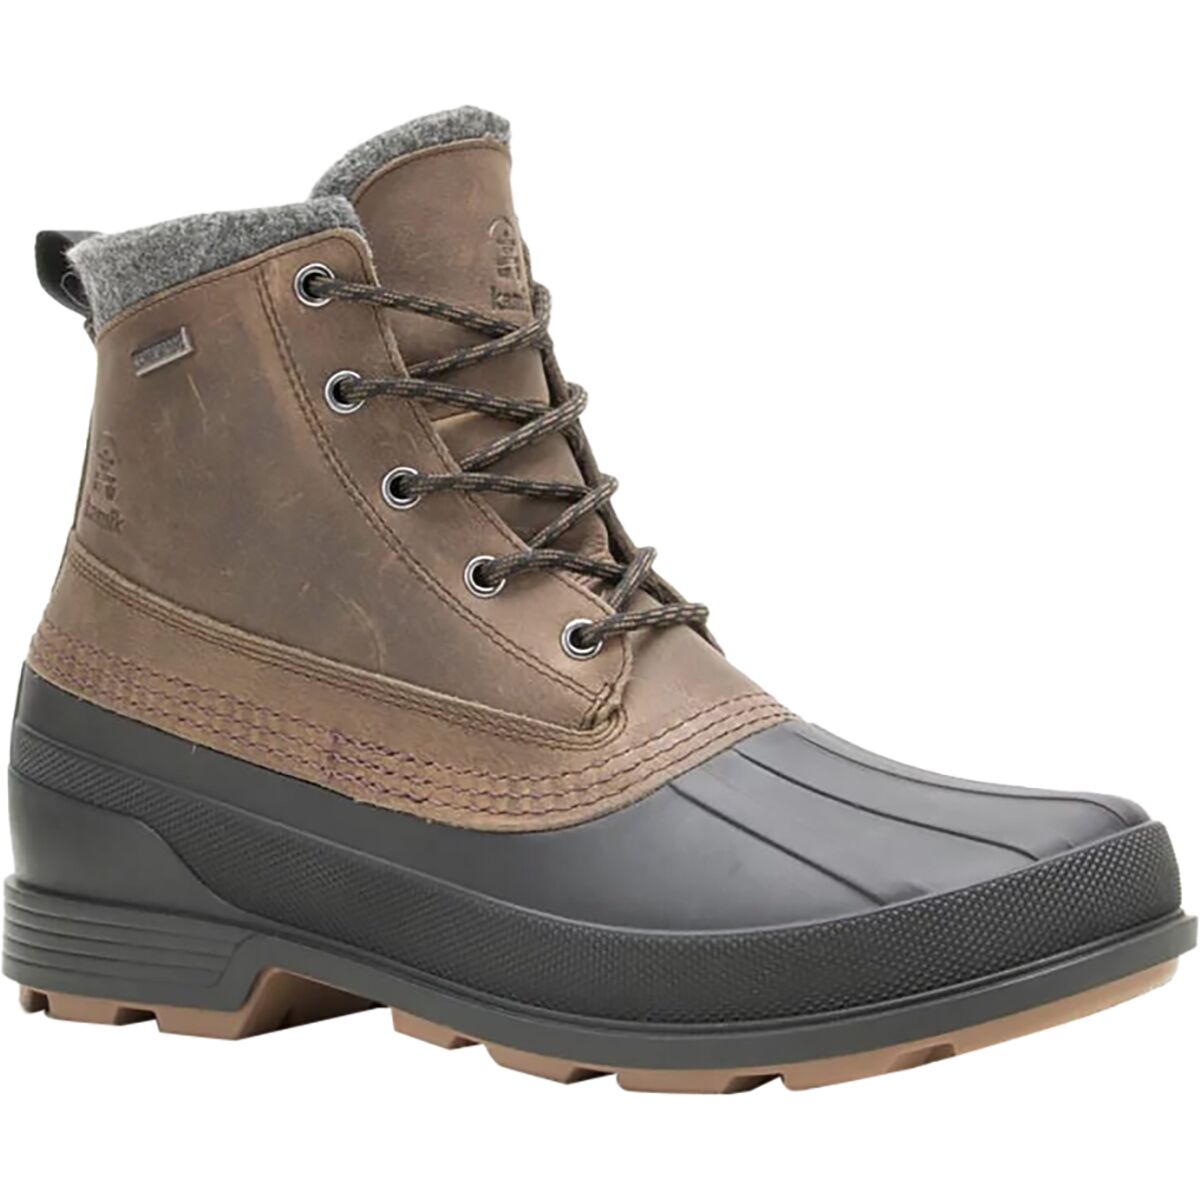 Lawrence Mid Boot - Men